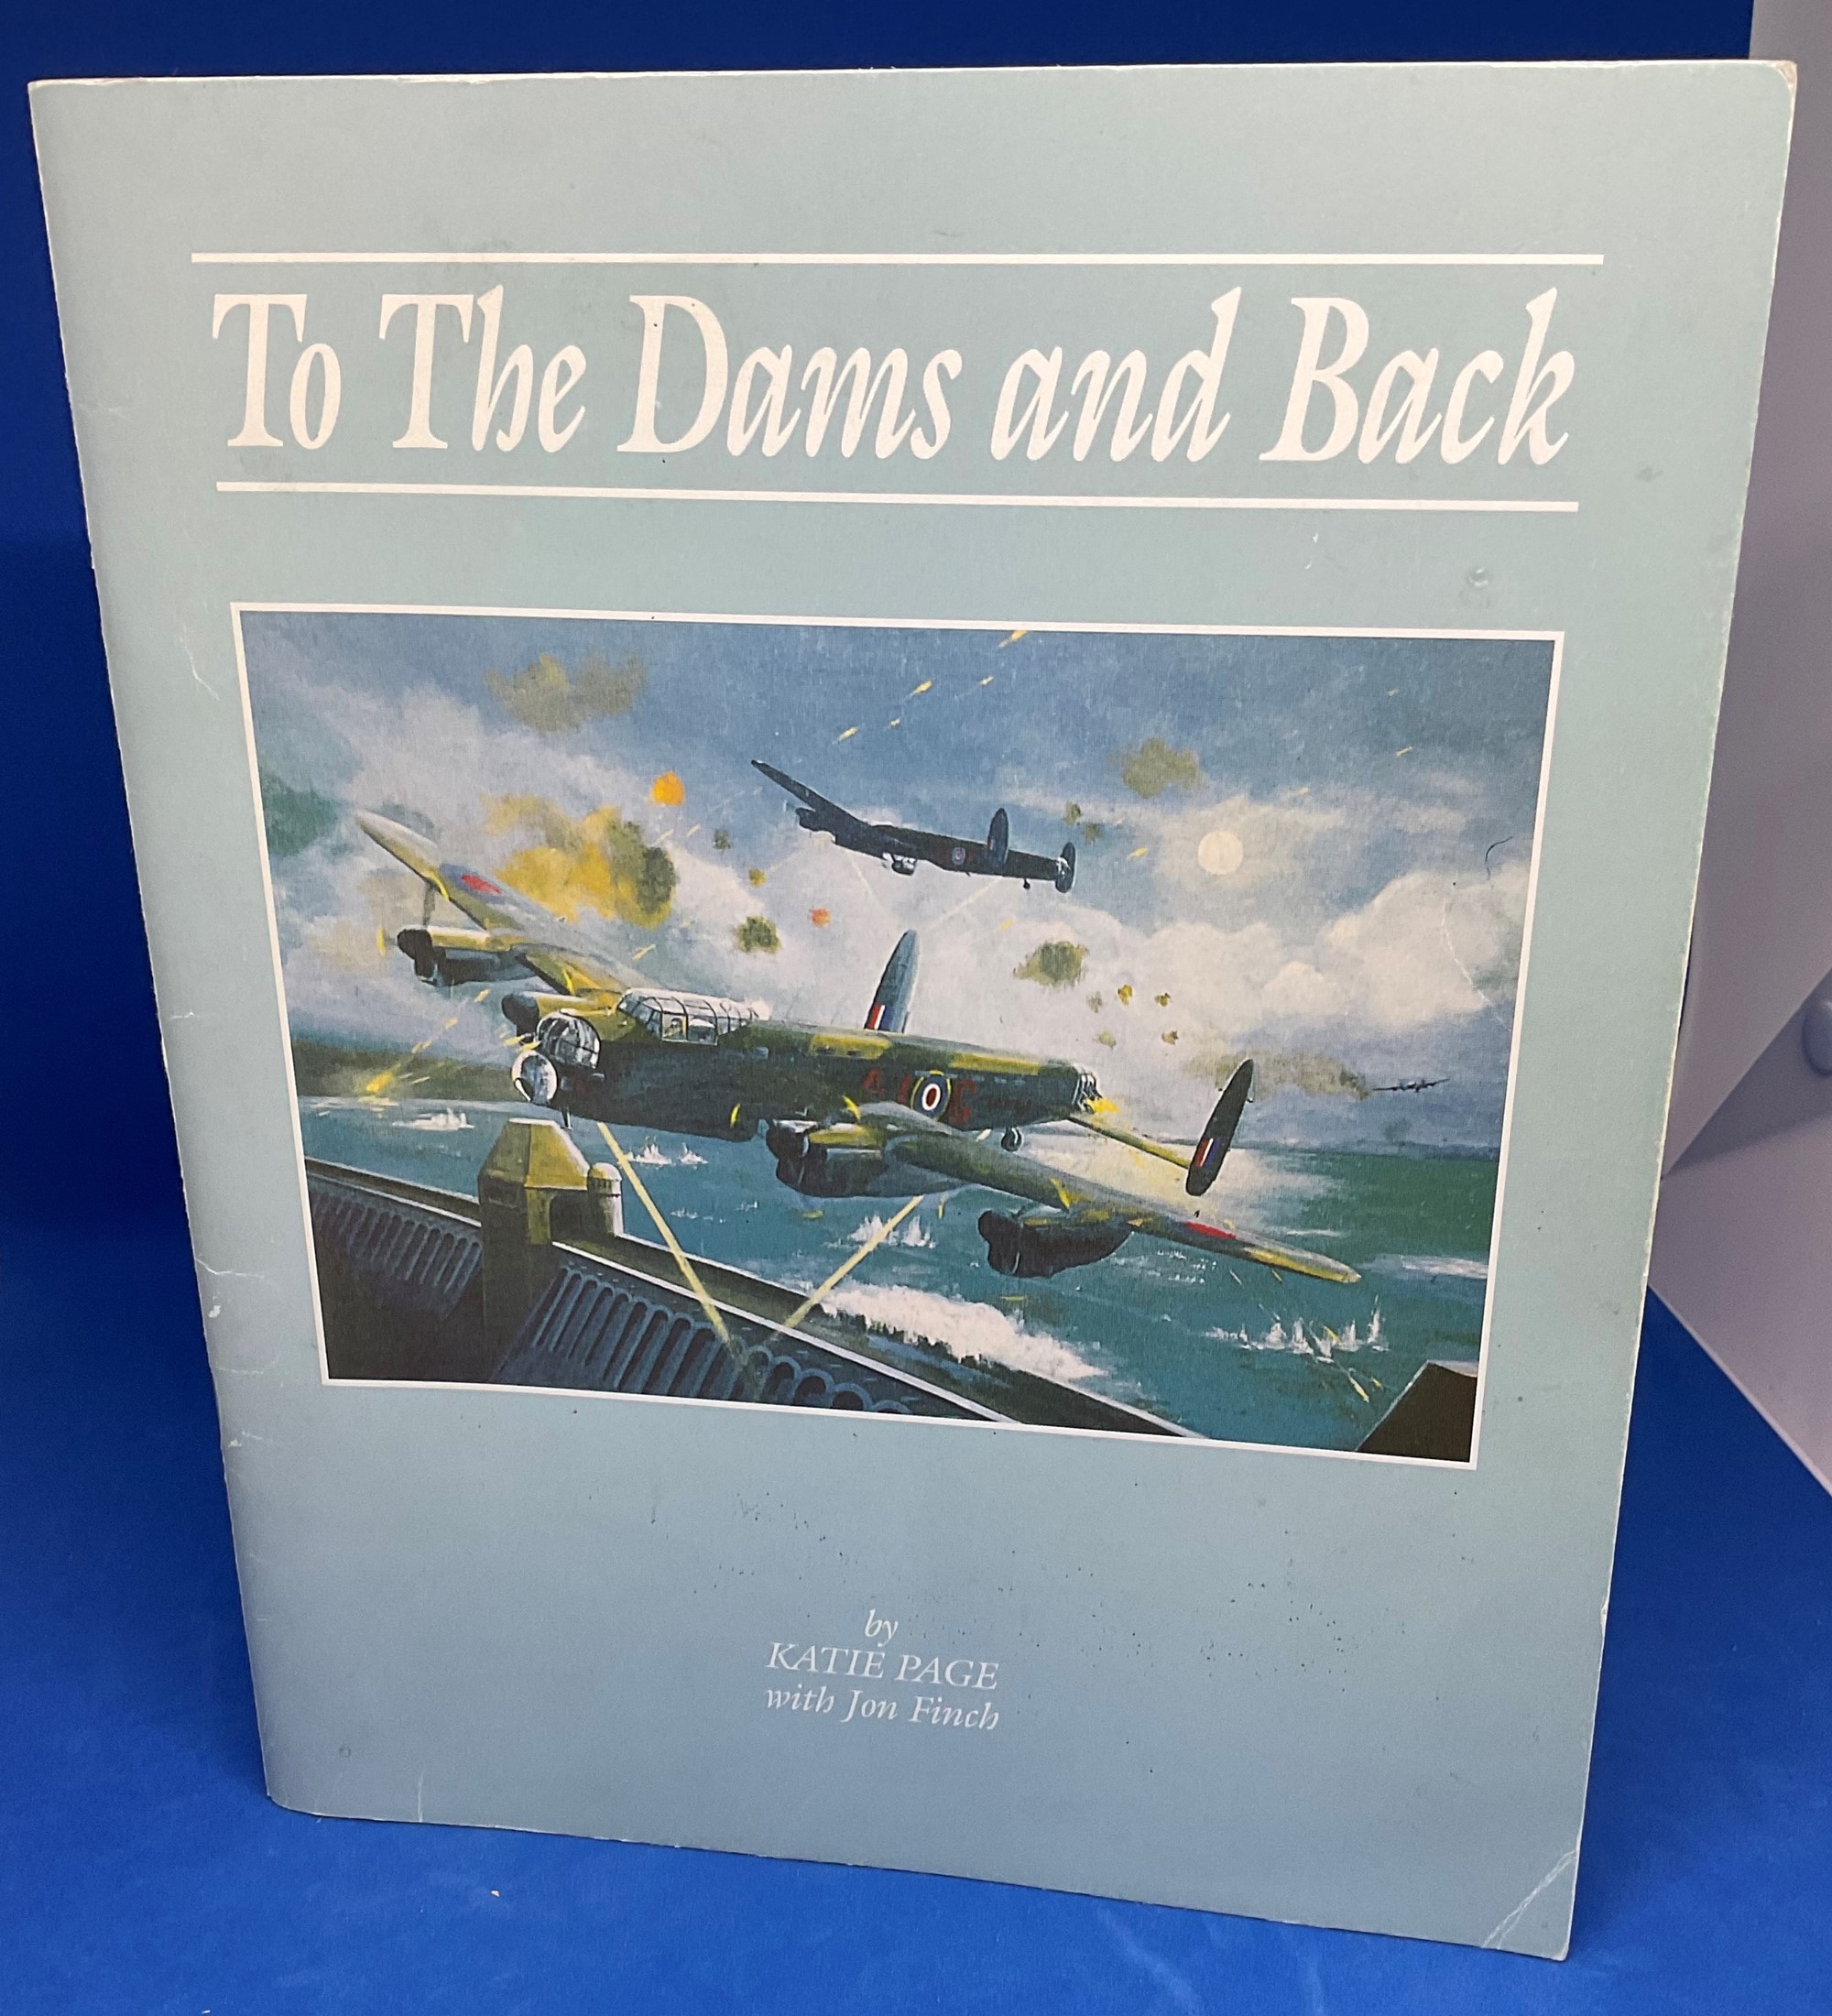 Katie Page Paperback Book titled To The Dams and Back. Published by Grantham Museum. 55 pages.